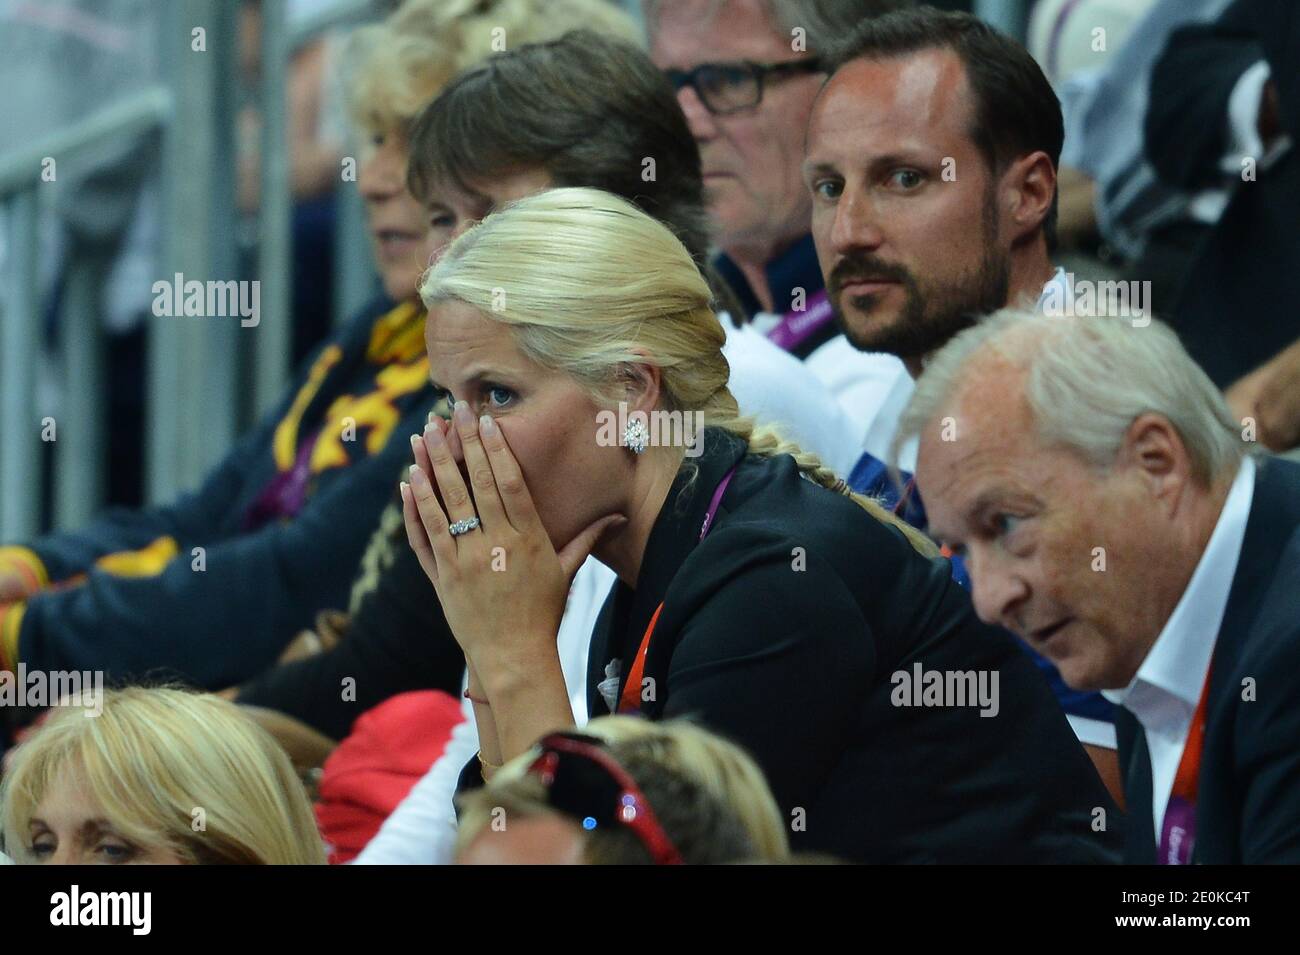 Crown Prince Haakon, Crown Princess Mete Marit of Norway with son Prince  Sverre Magnus and daughter Princess Ingrid Alexandra attend the women's  handball Final match for gold medal, Norway vs Montenegro at